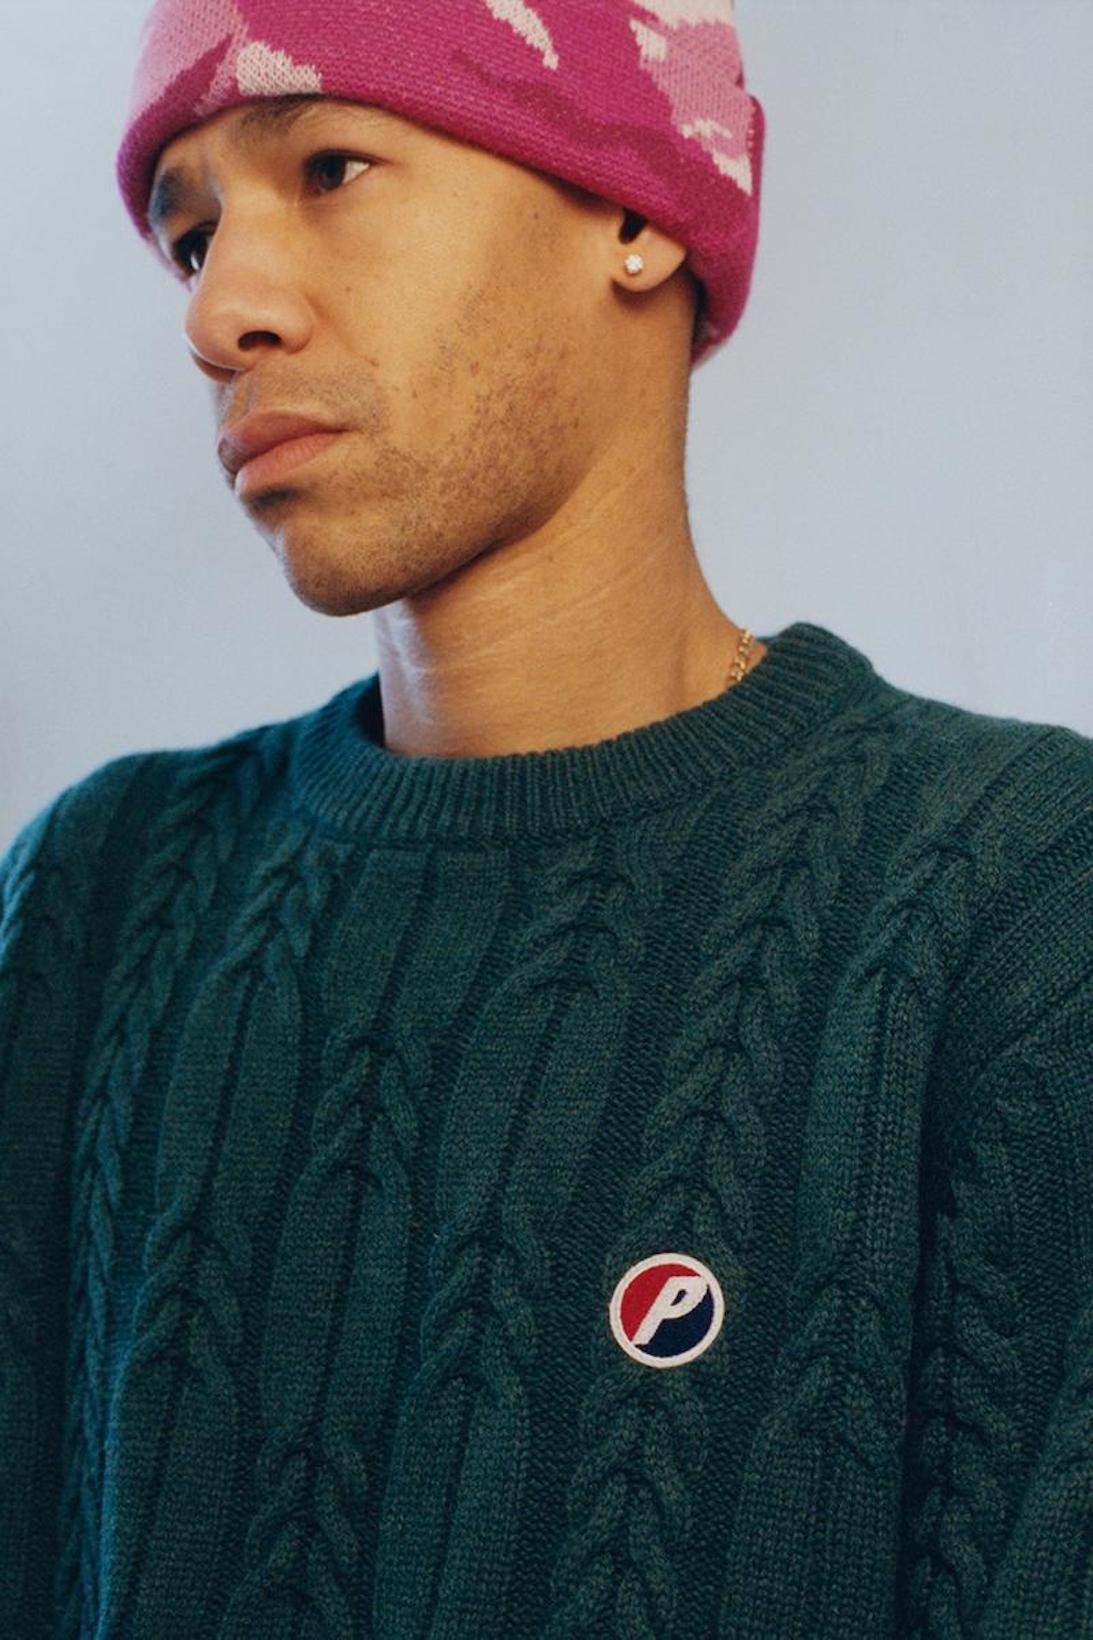 palace skateboards spring summer collection lookbook beanie sweater